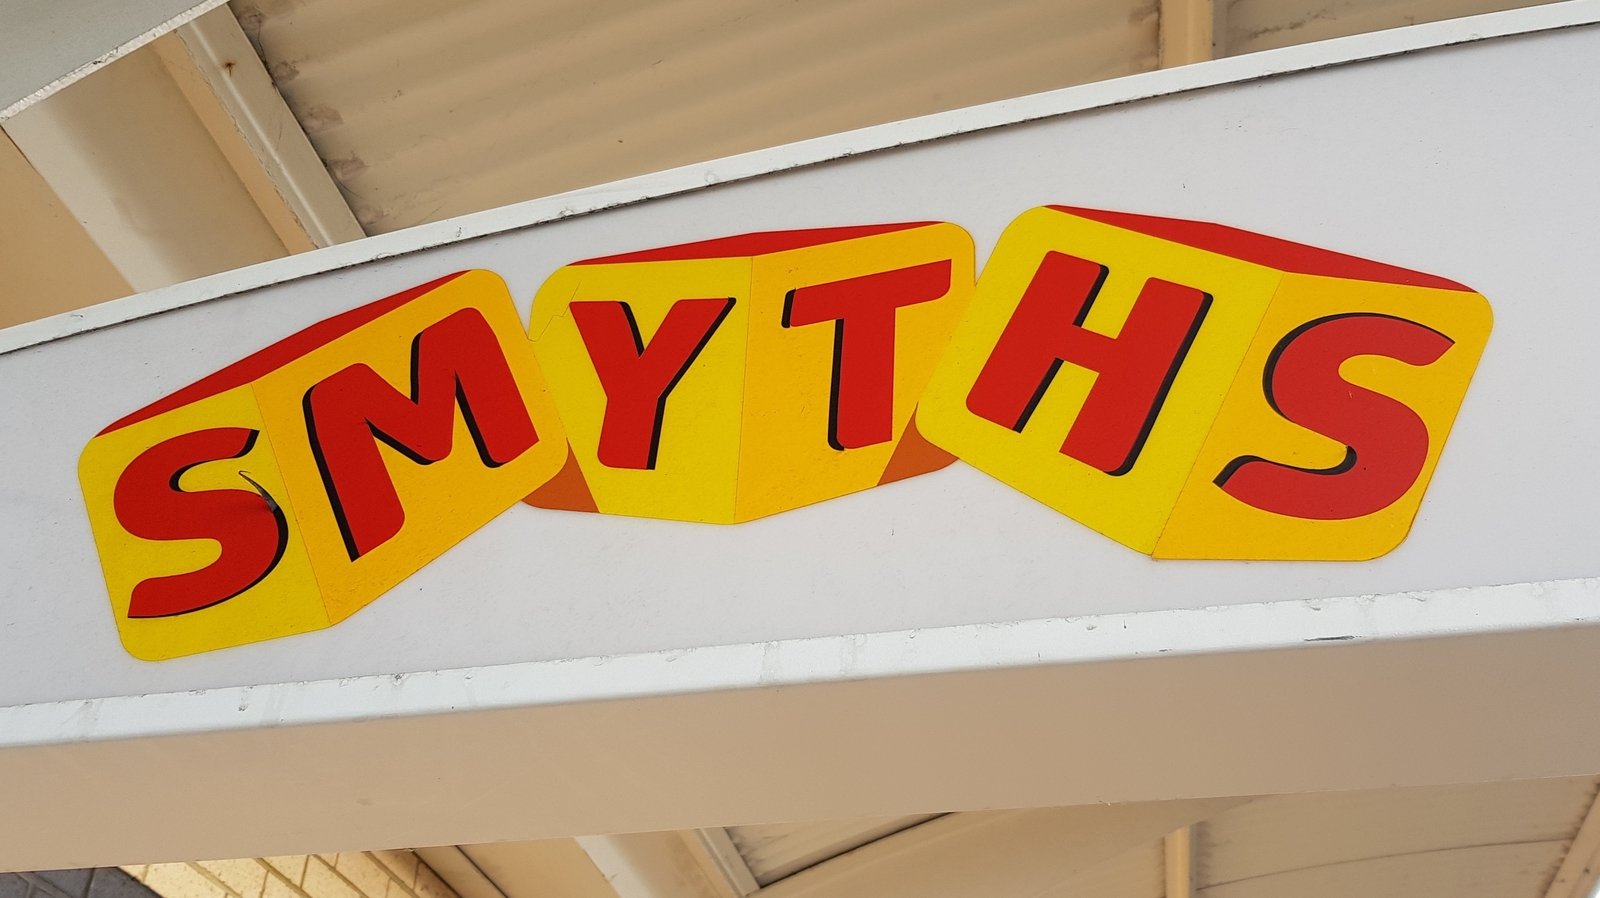 Profits at Smyths Toys in Ireland rise 22.5% to €5.33m